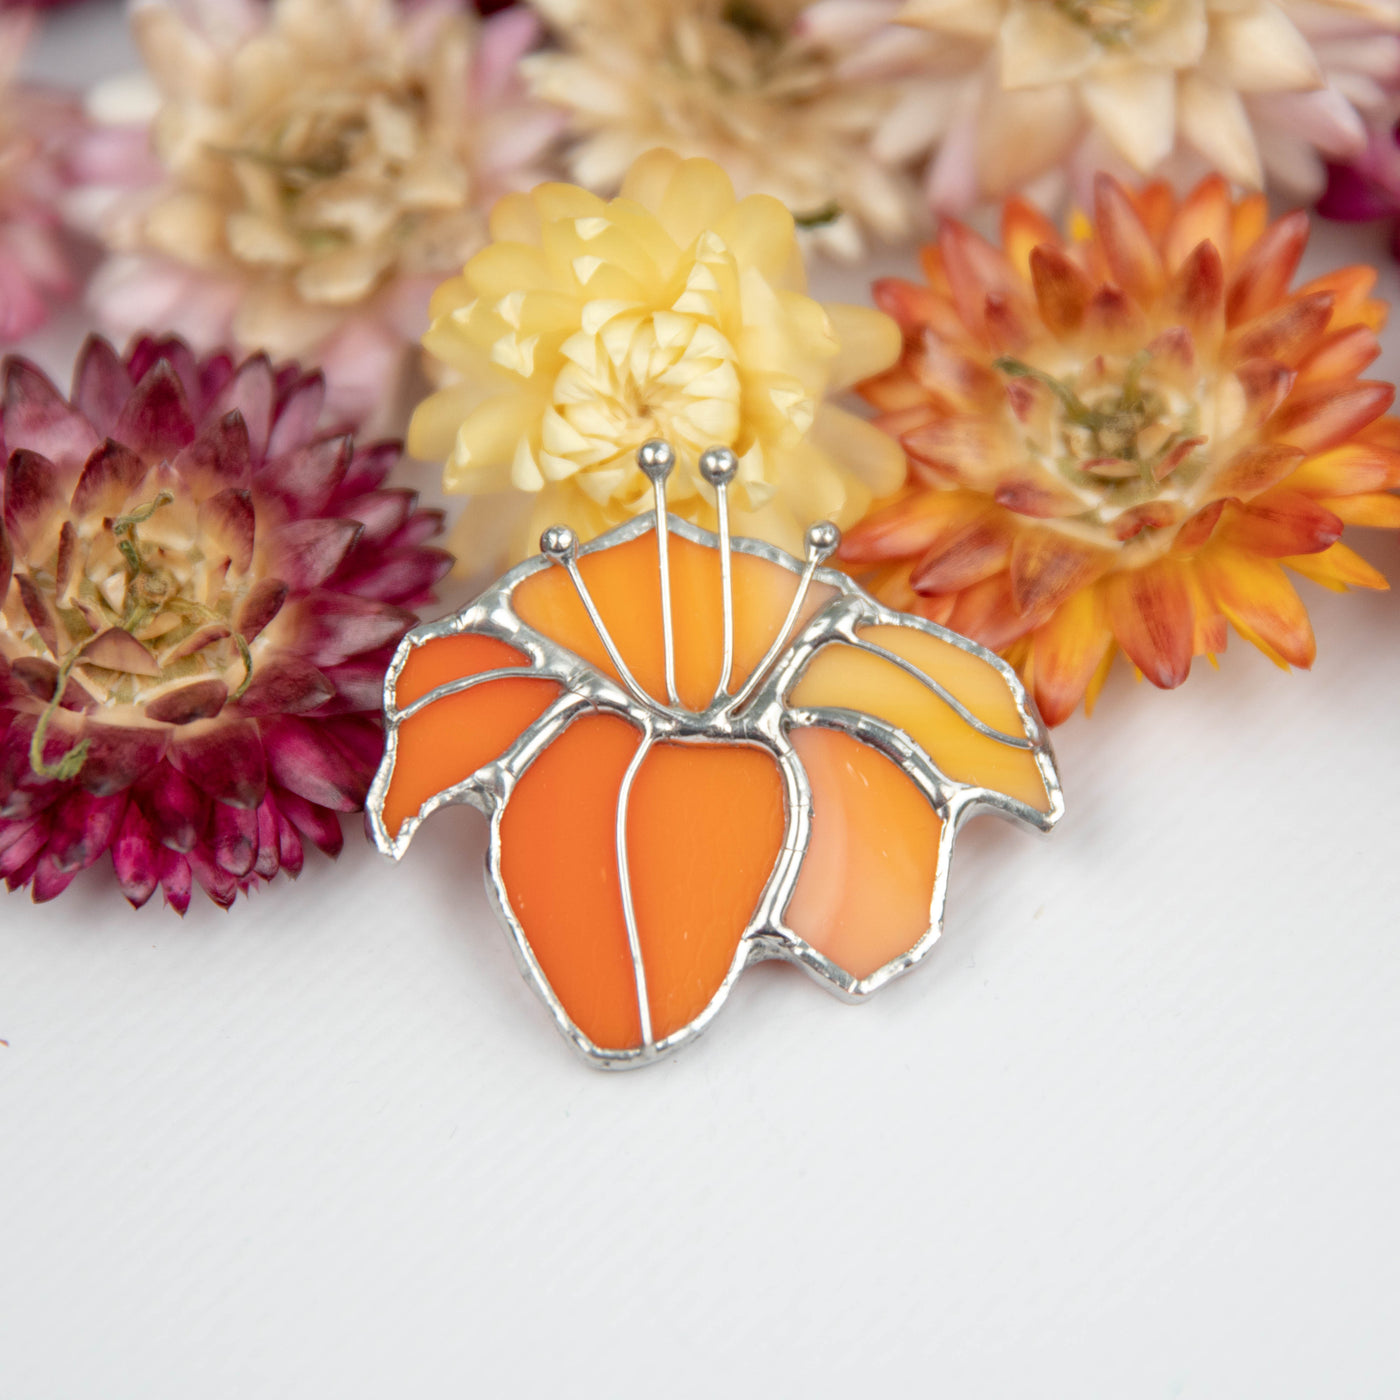 Zoomed stained glass lily pin of orange color